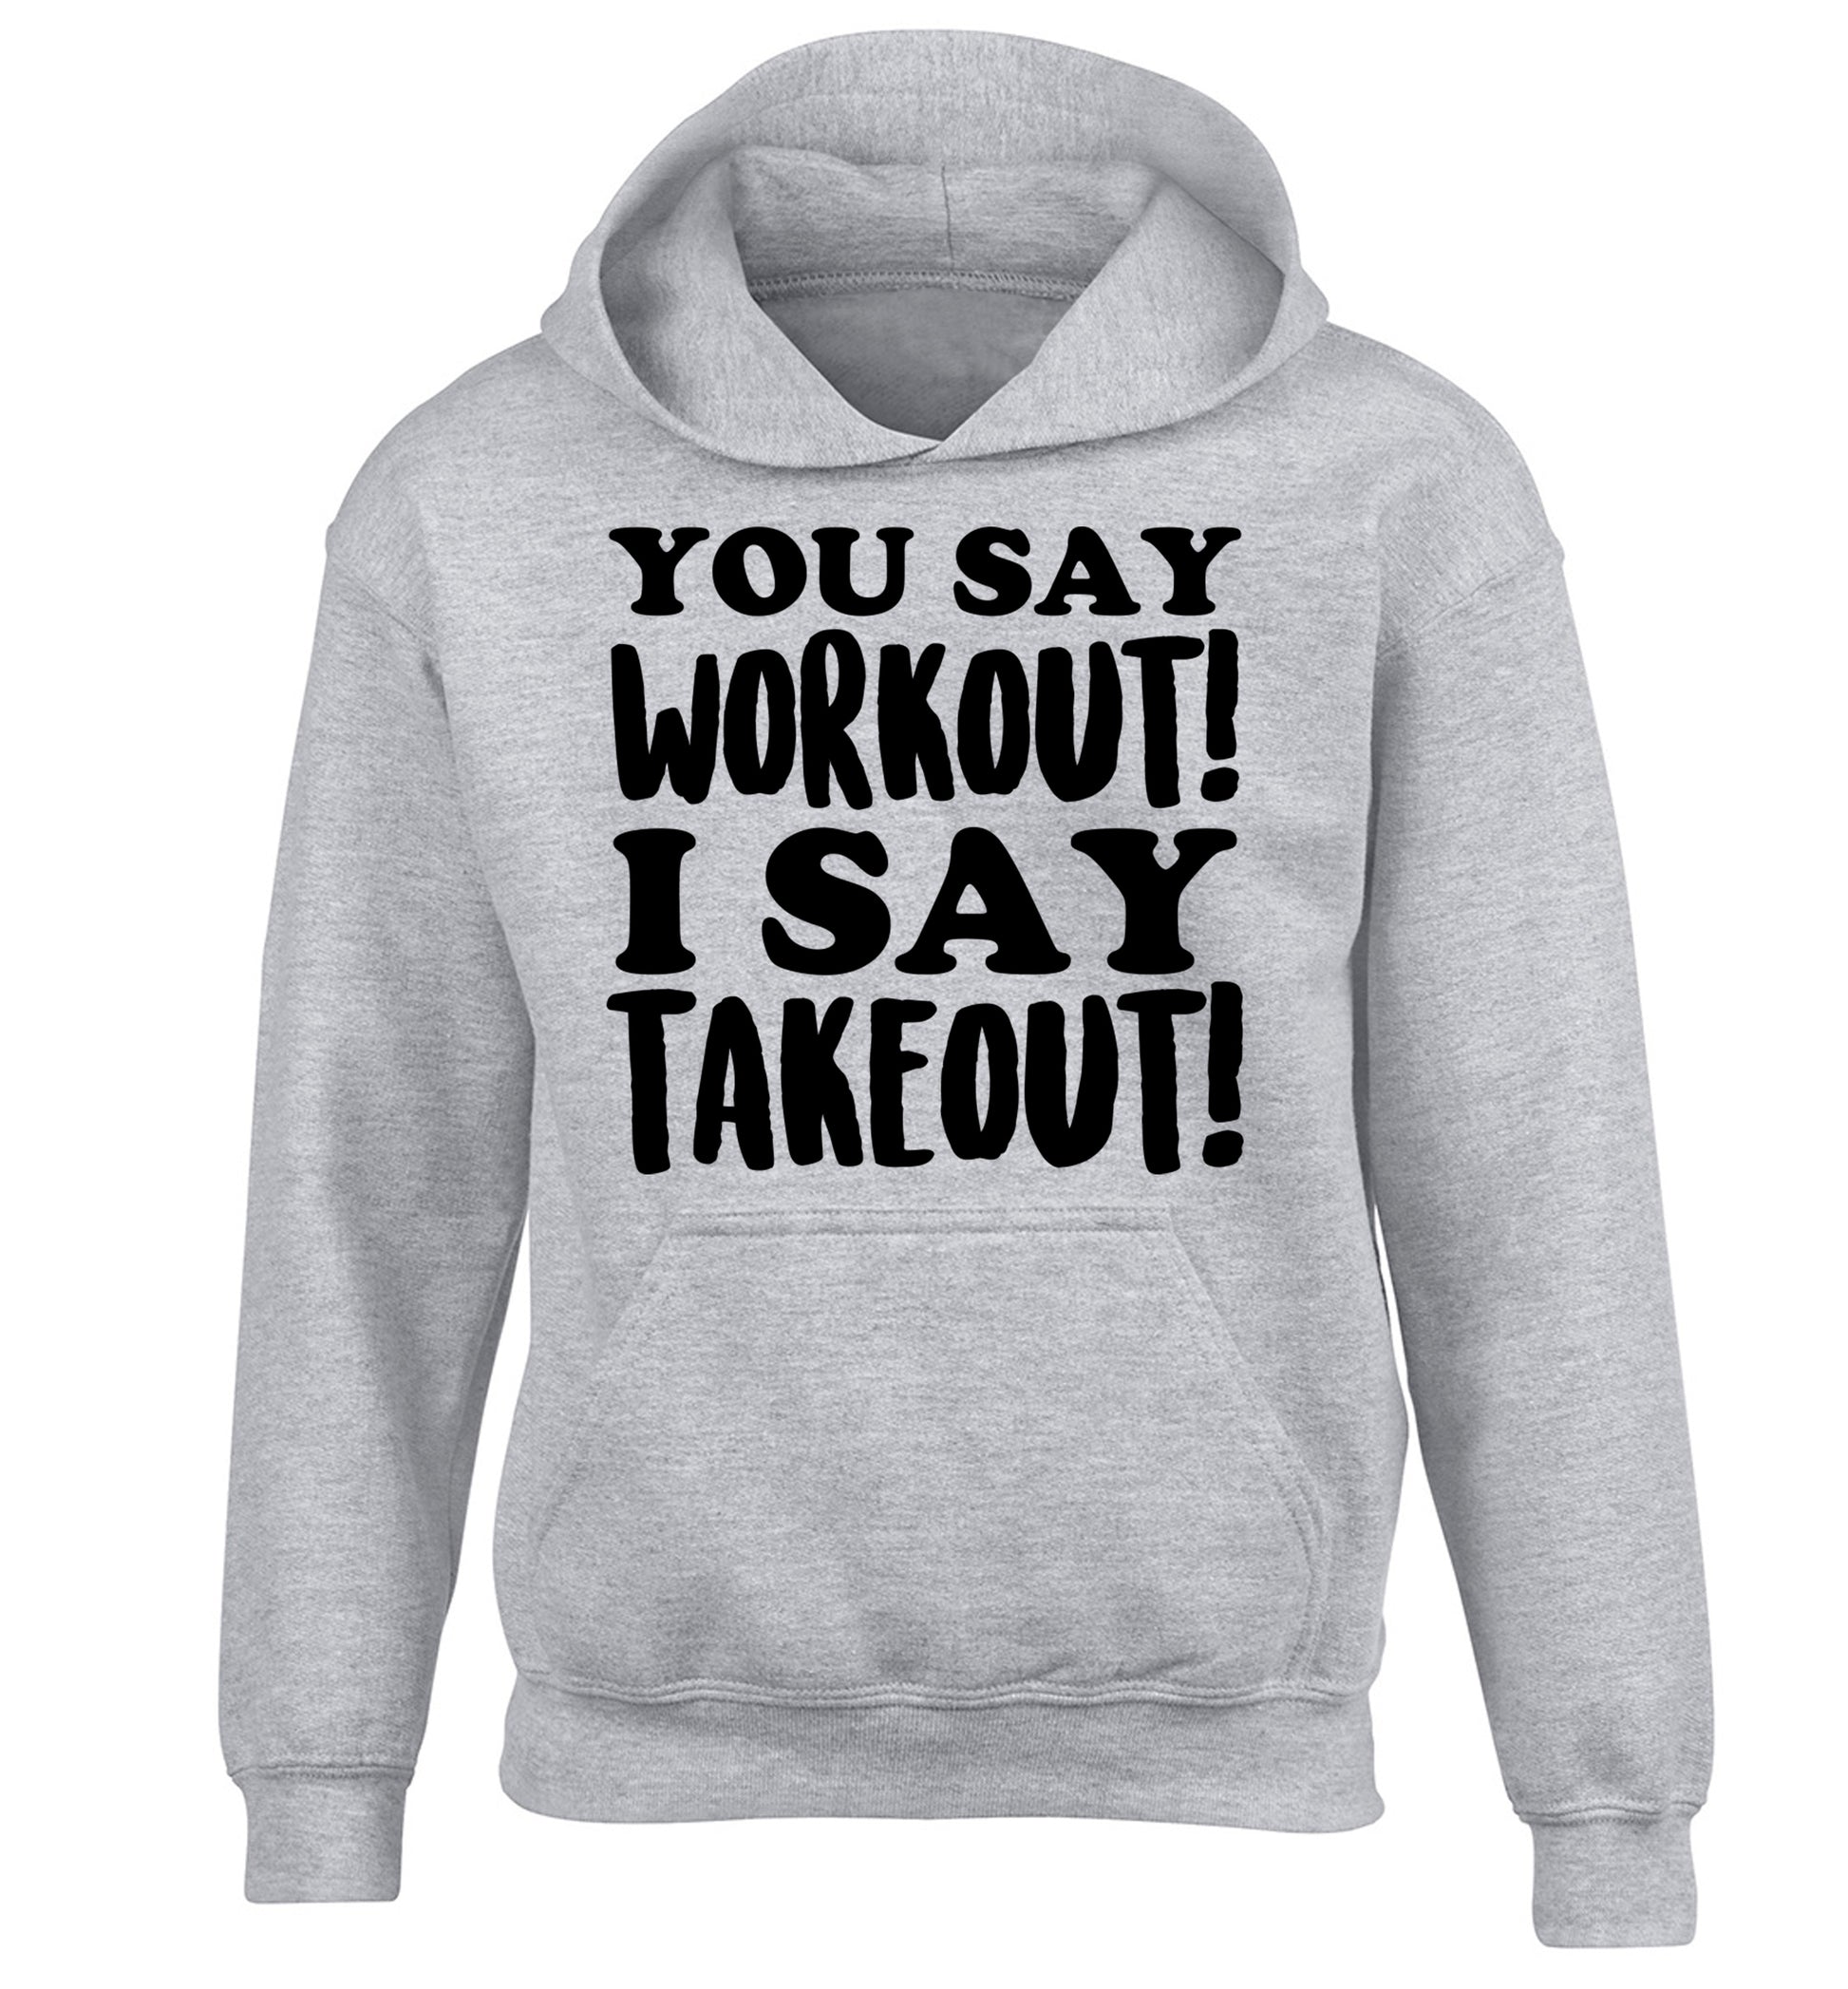 You say workout I say takeout! children's grey hoodie 12-14 Years